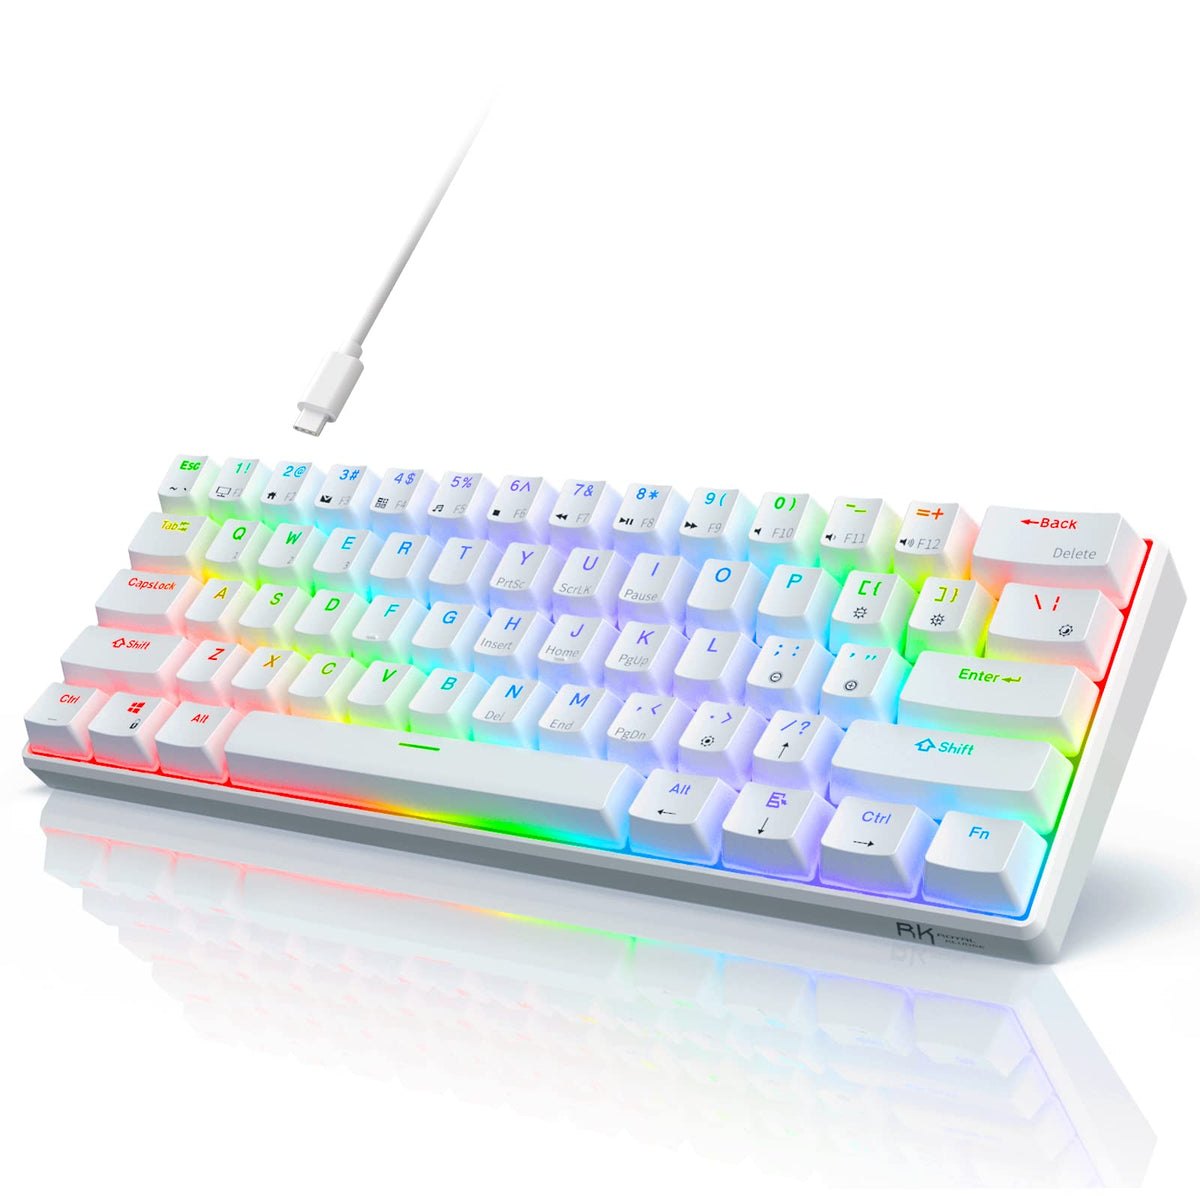 RK ROYAL KLUDGE RK61 Wired 60% Mechanical Gaming Keyboard RGB Backlit Ultra-Compact Hot-Swappable Red Switch White